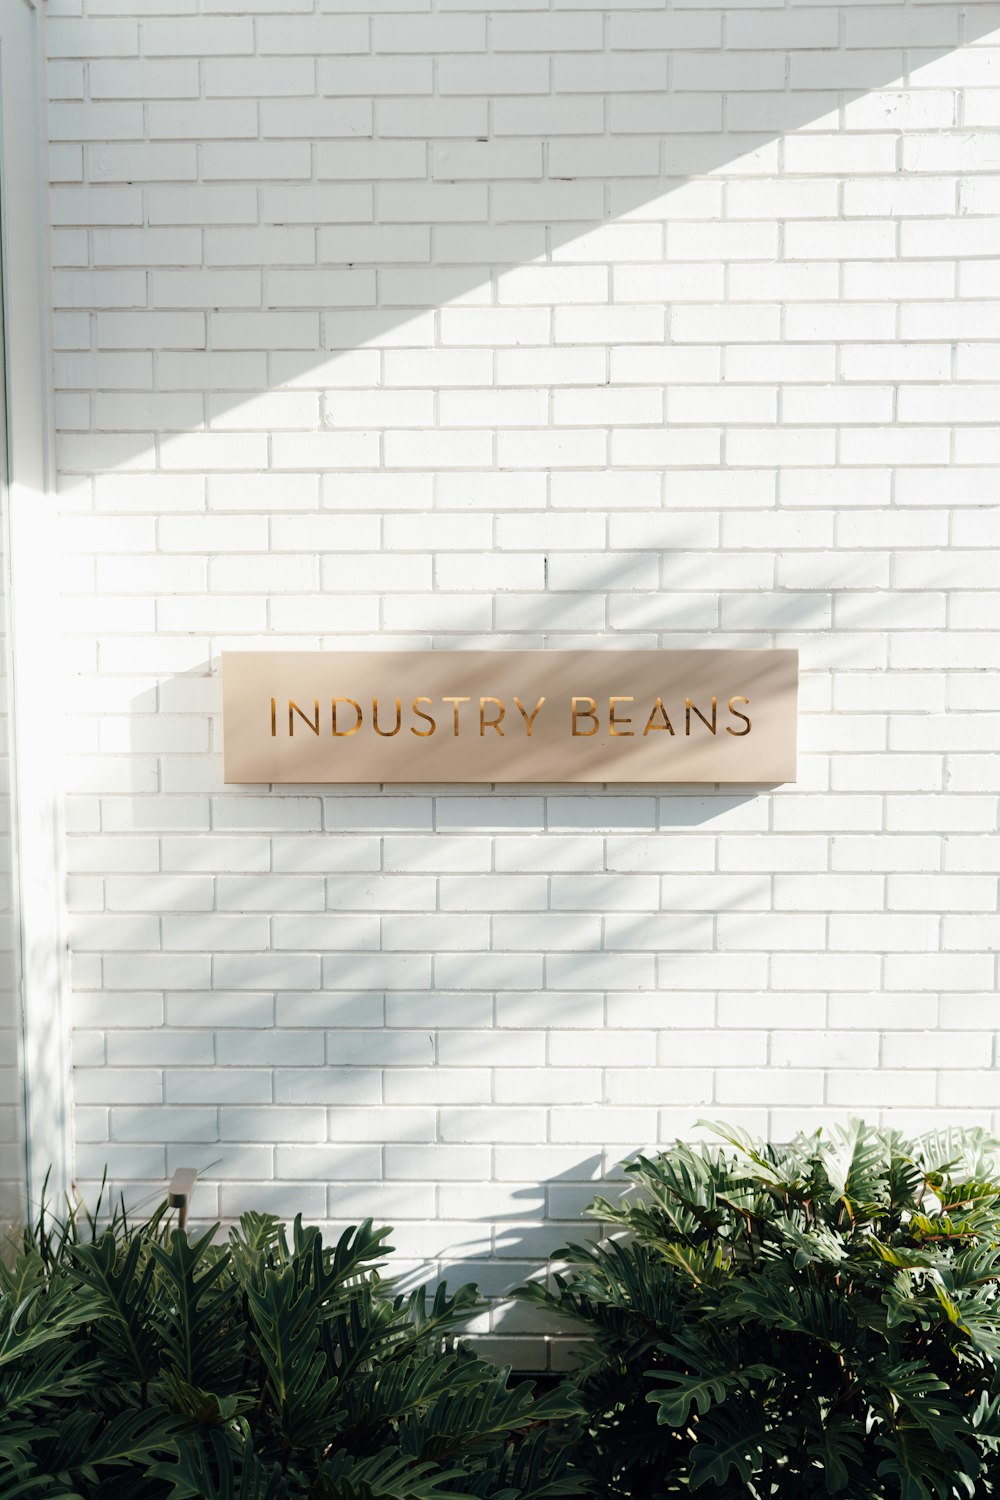 a brick building with a sign that says industry beans